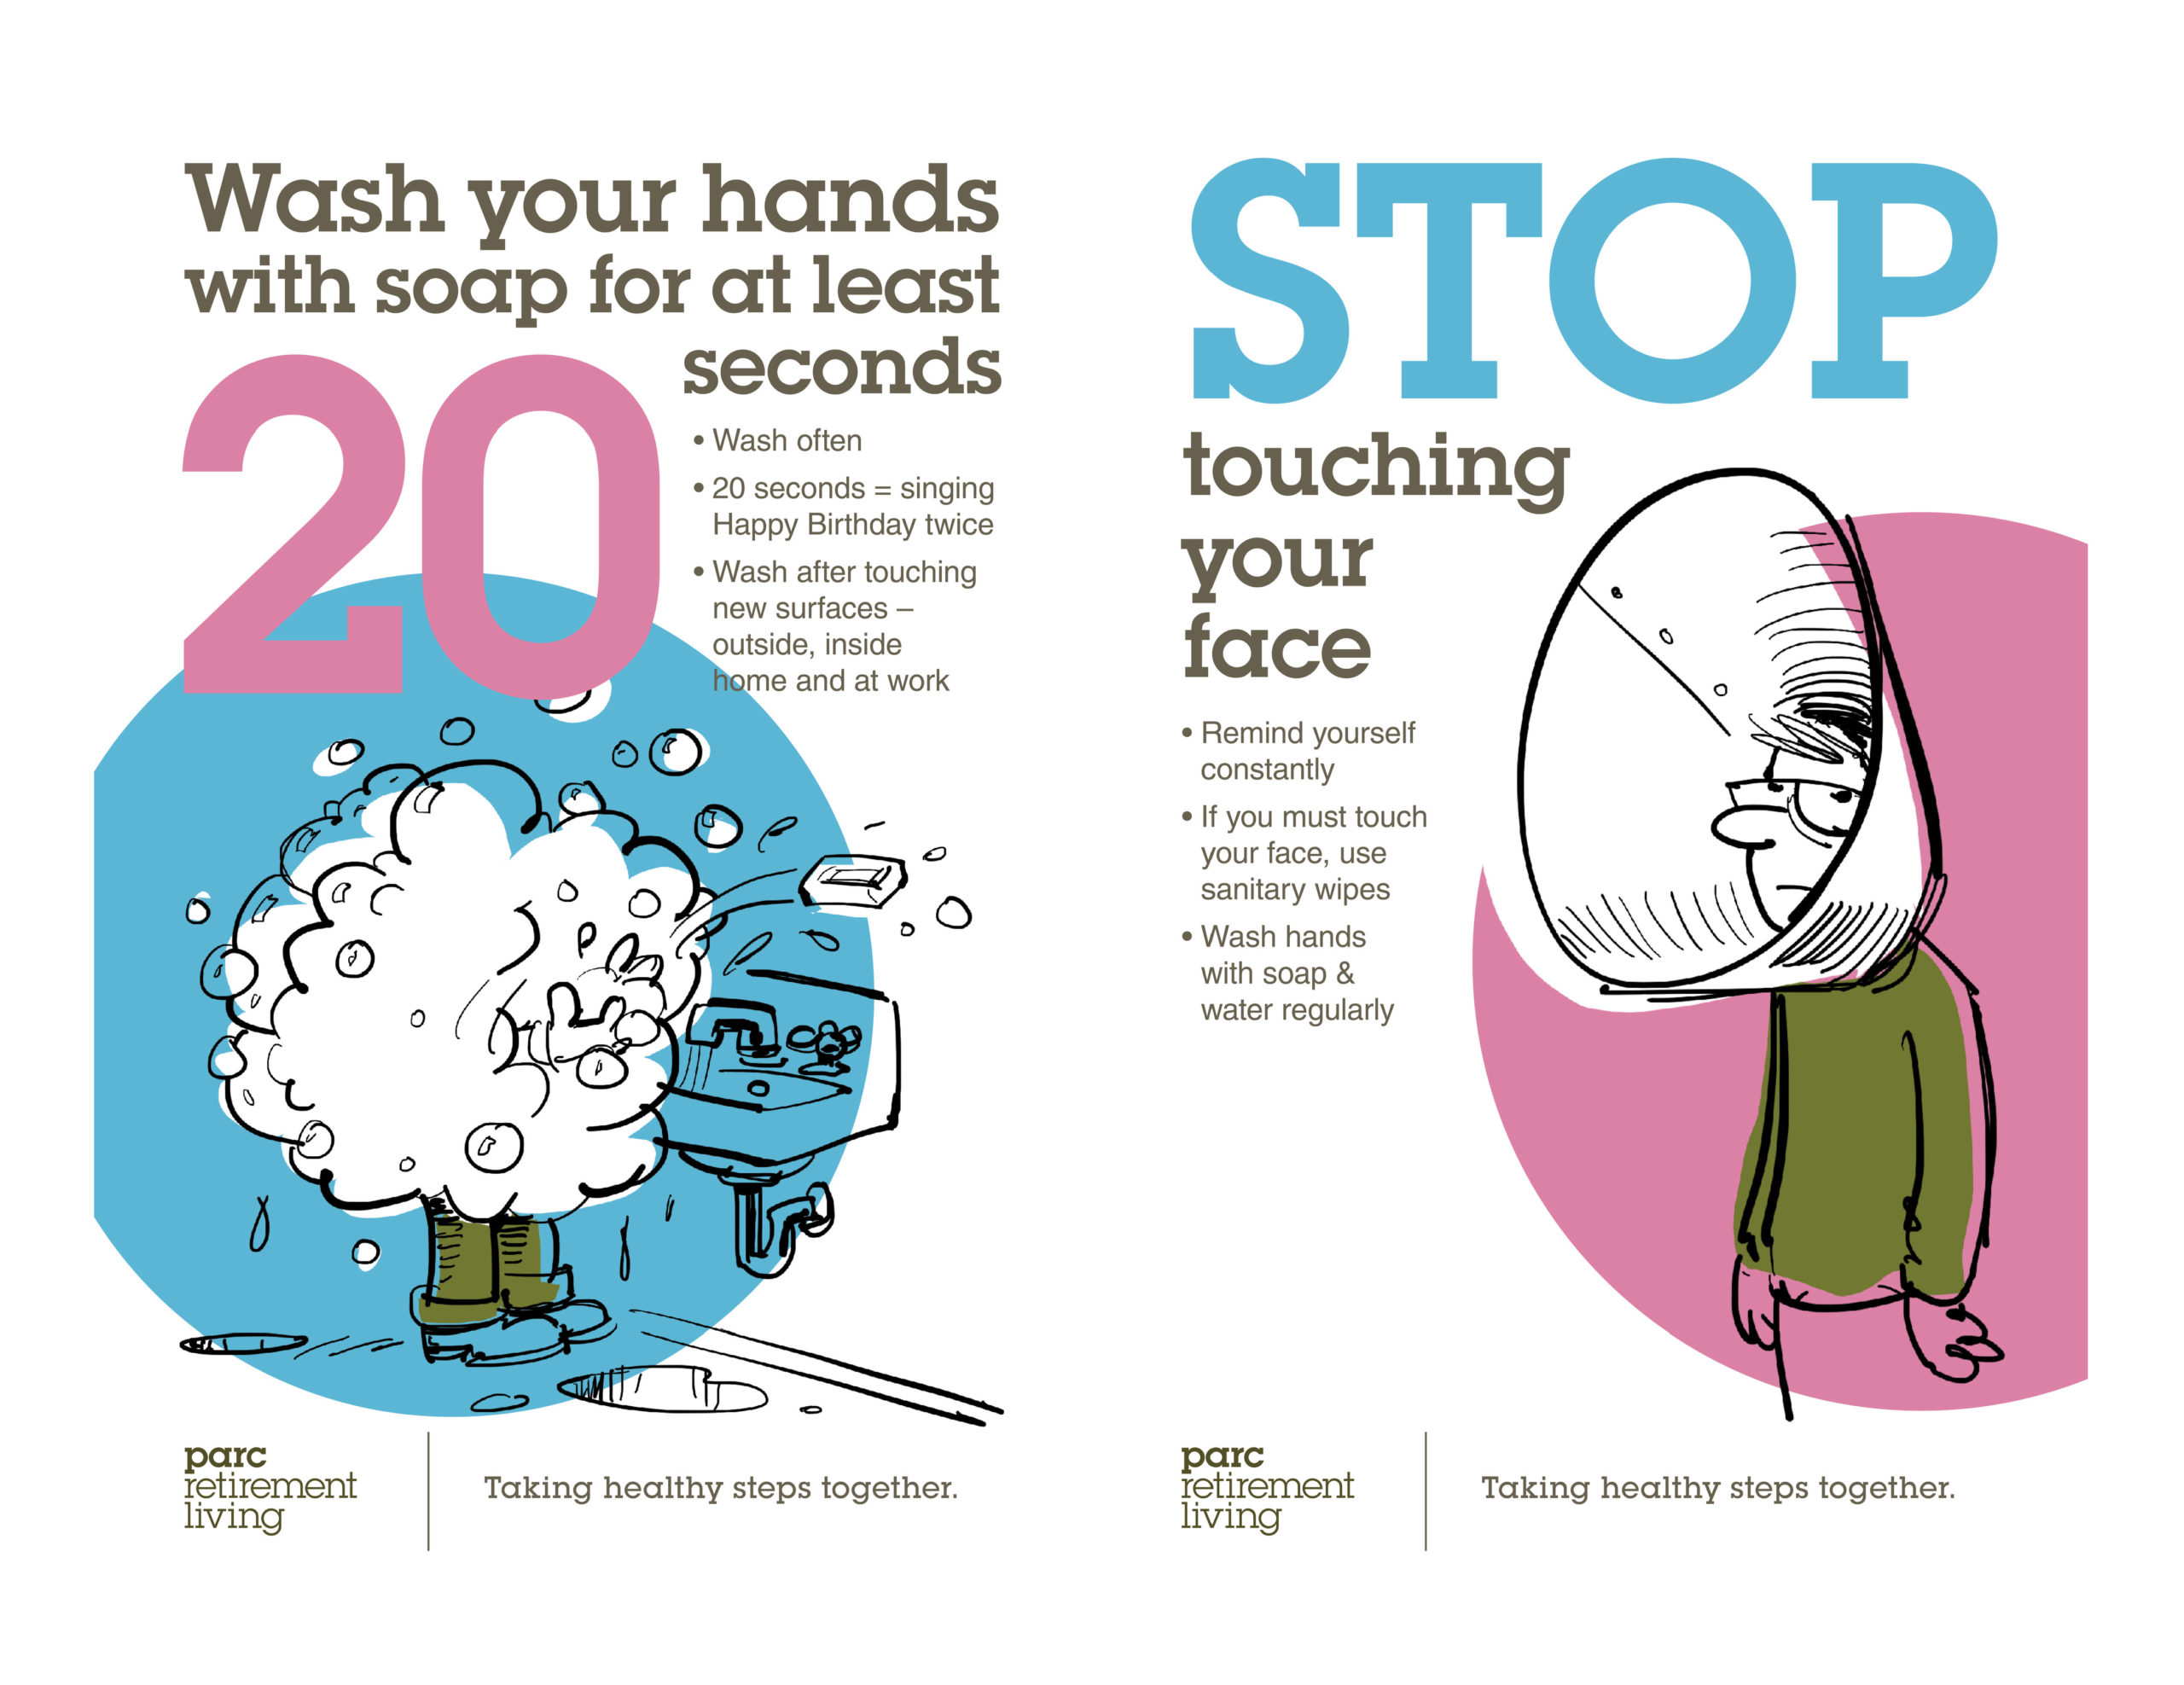 Wash hands and stop touching face posters